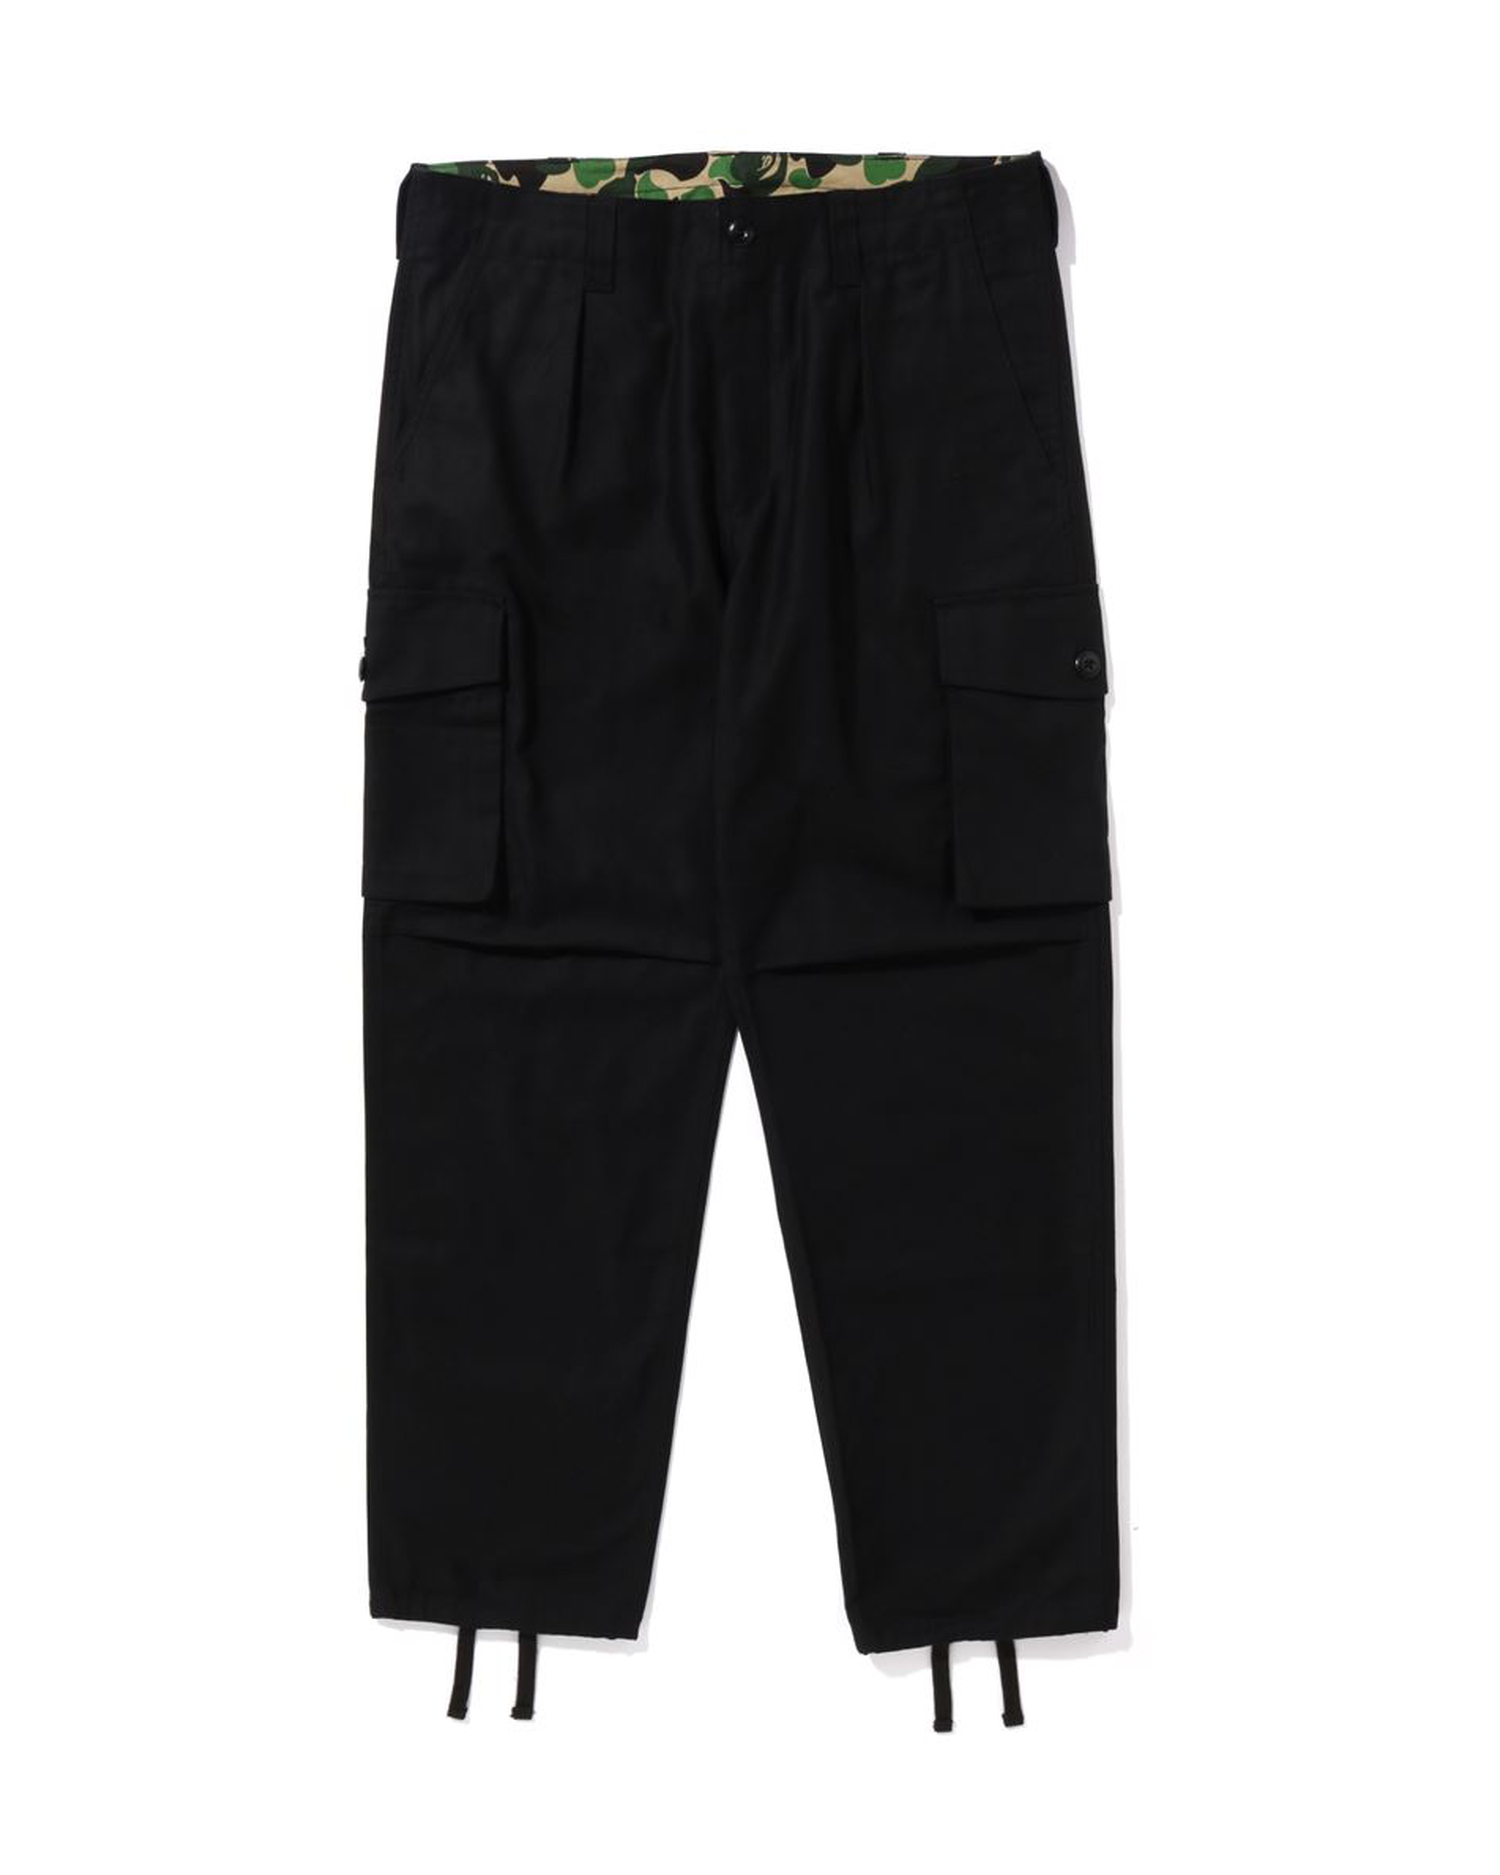 6 Pocket Trousers S - Buy 6 Pocket Trousers S online in India